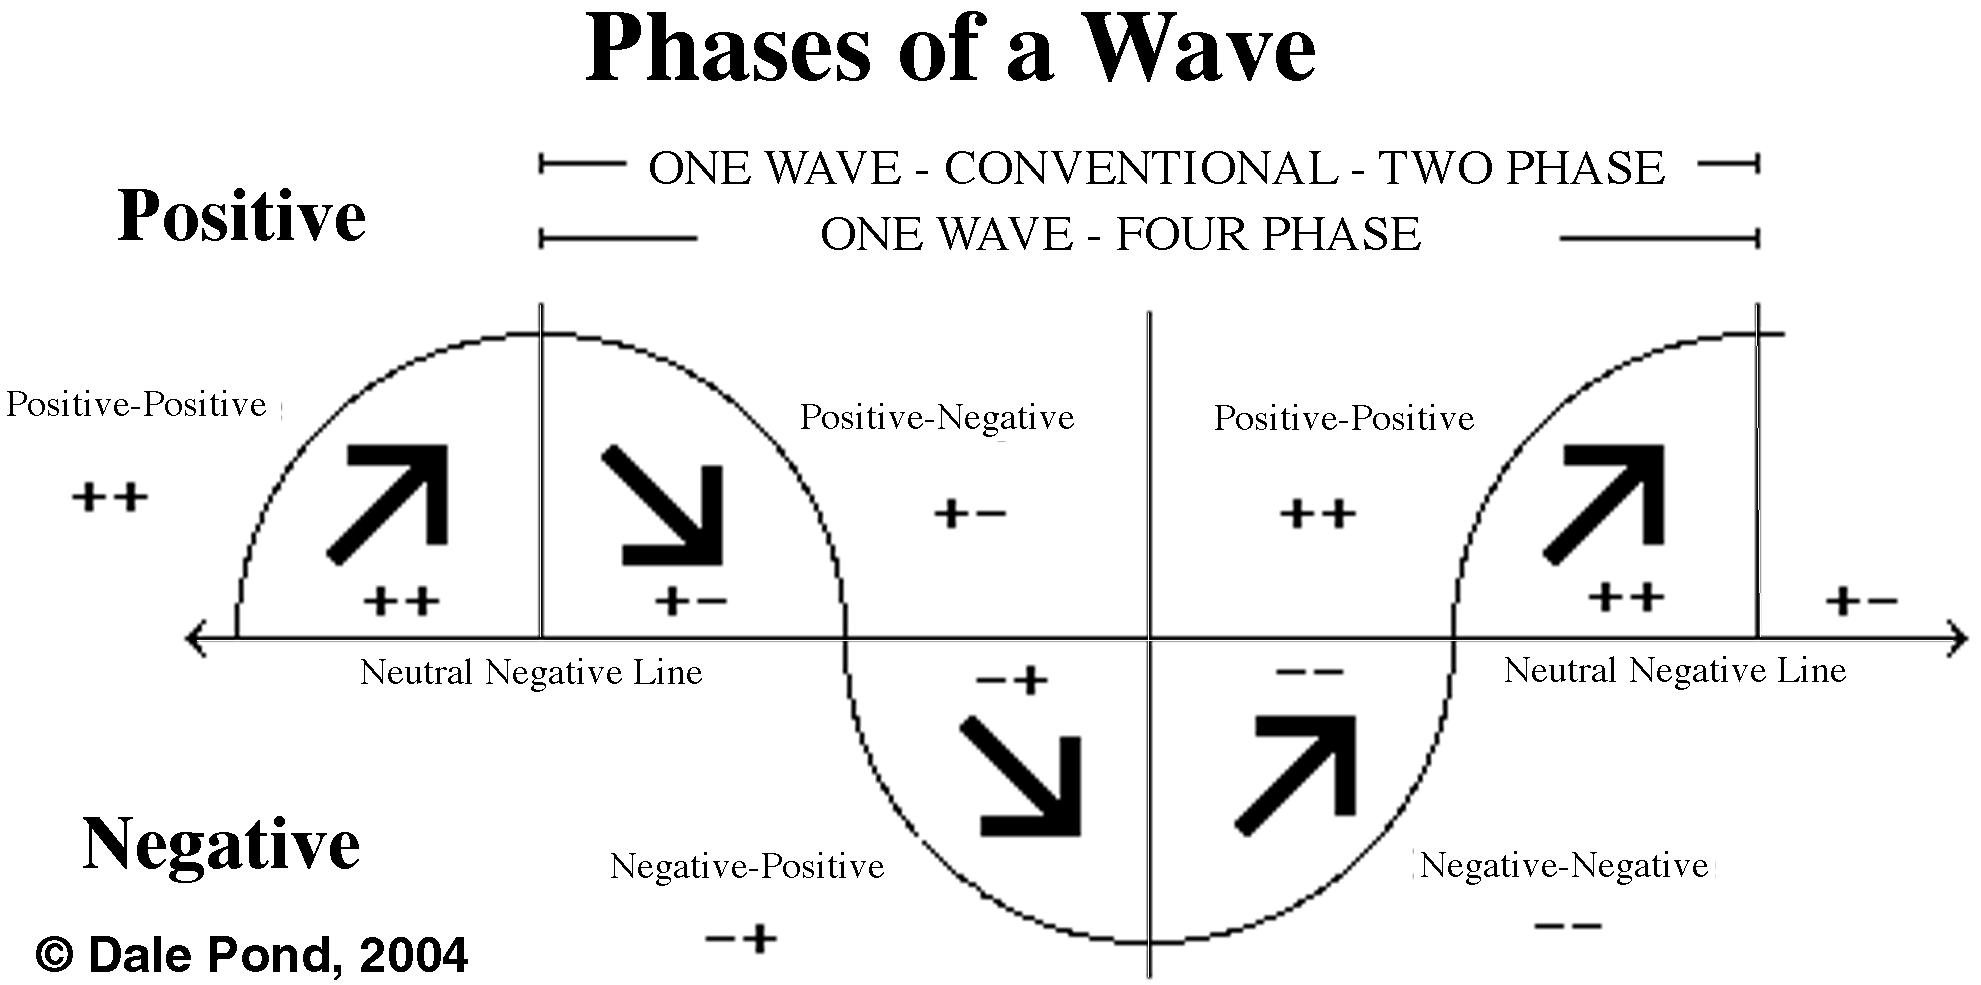 Four Phases of a Wave